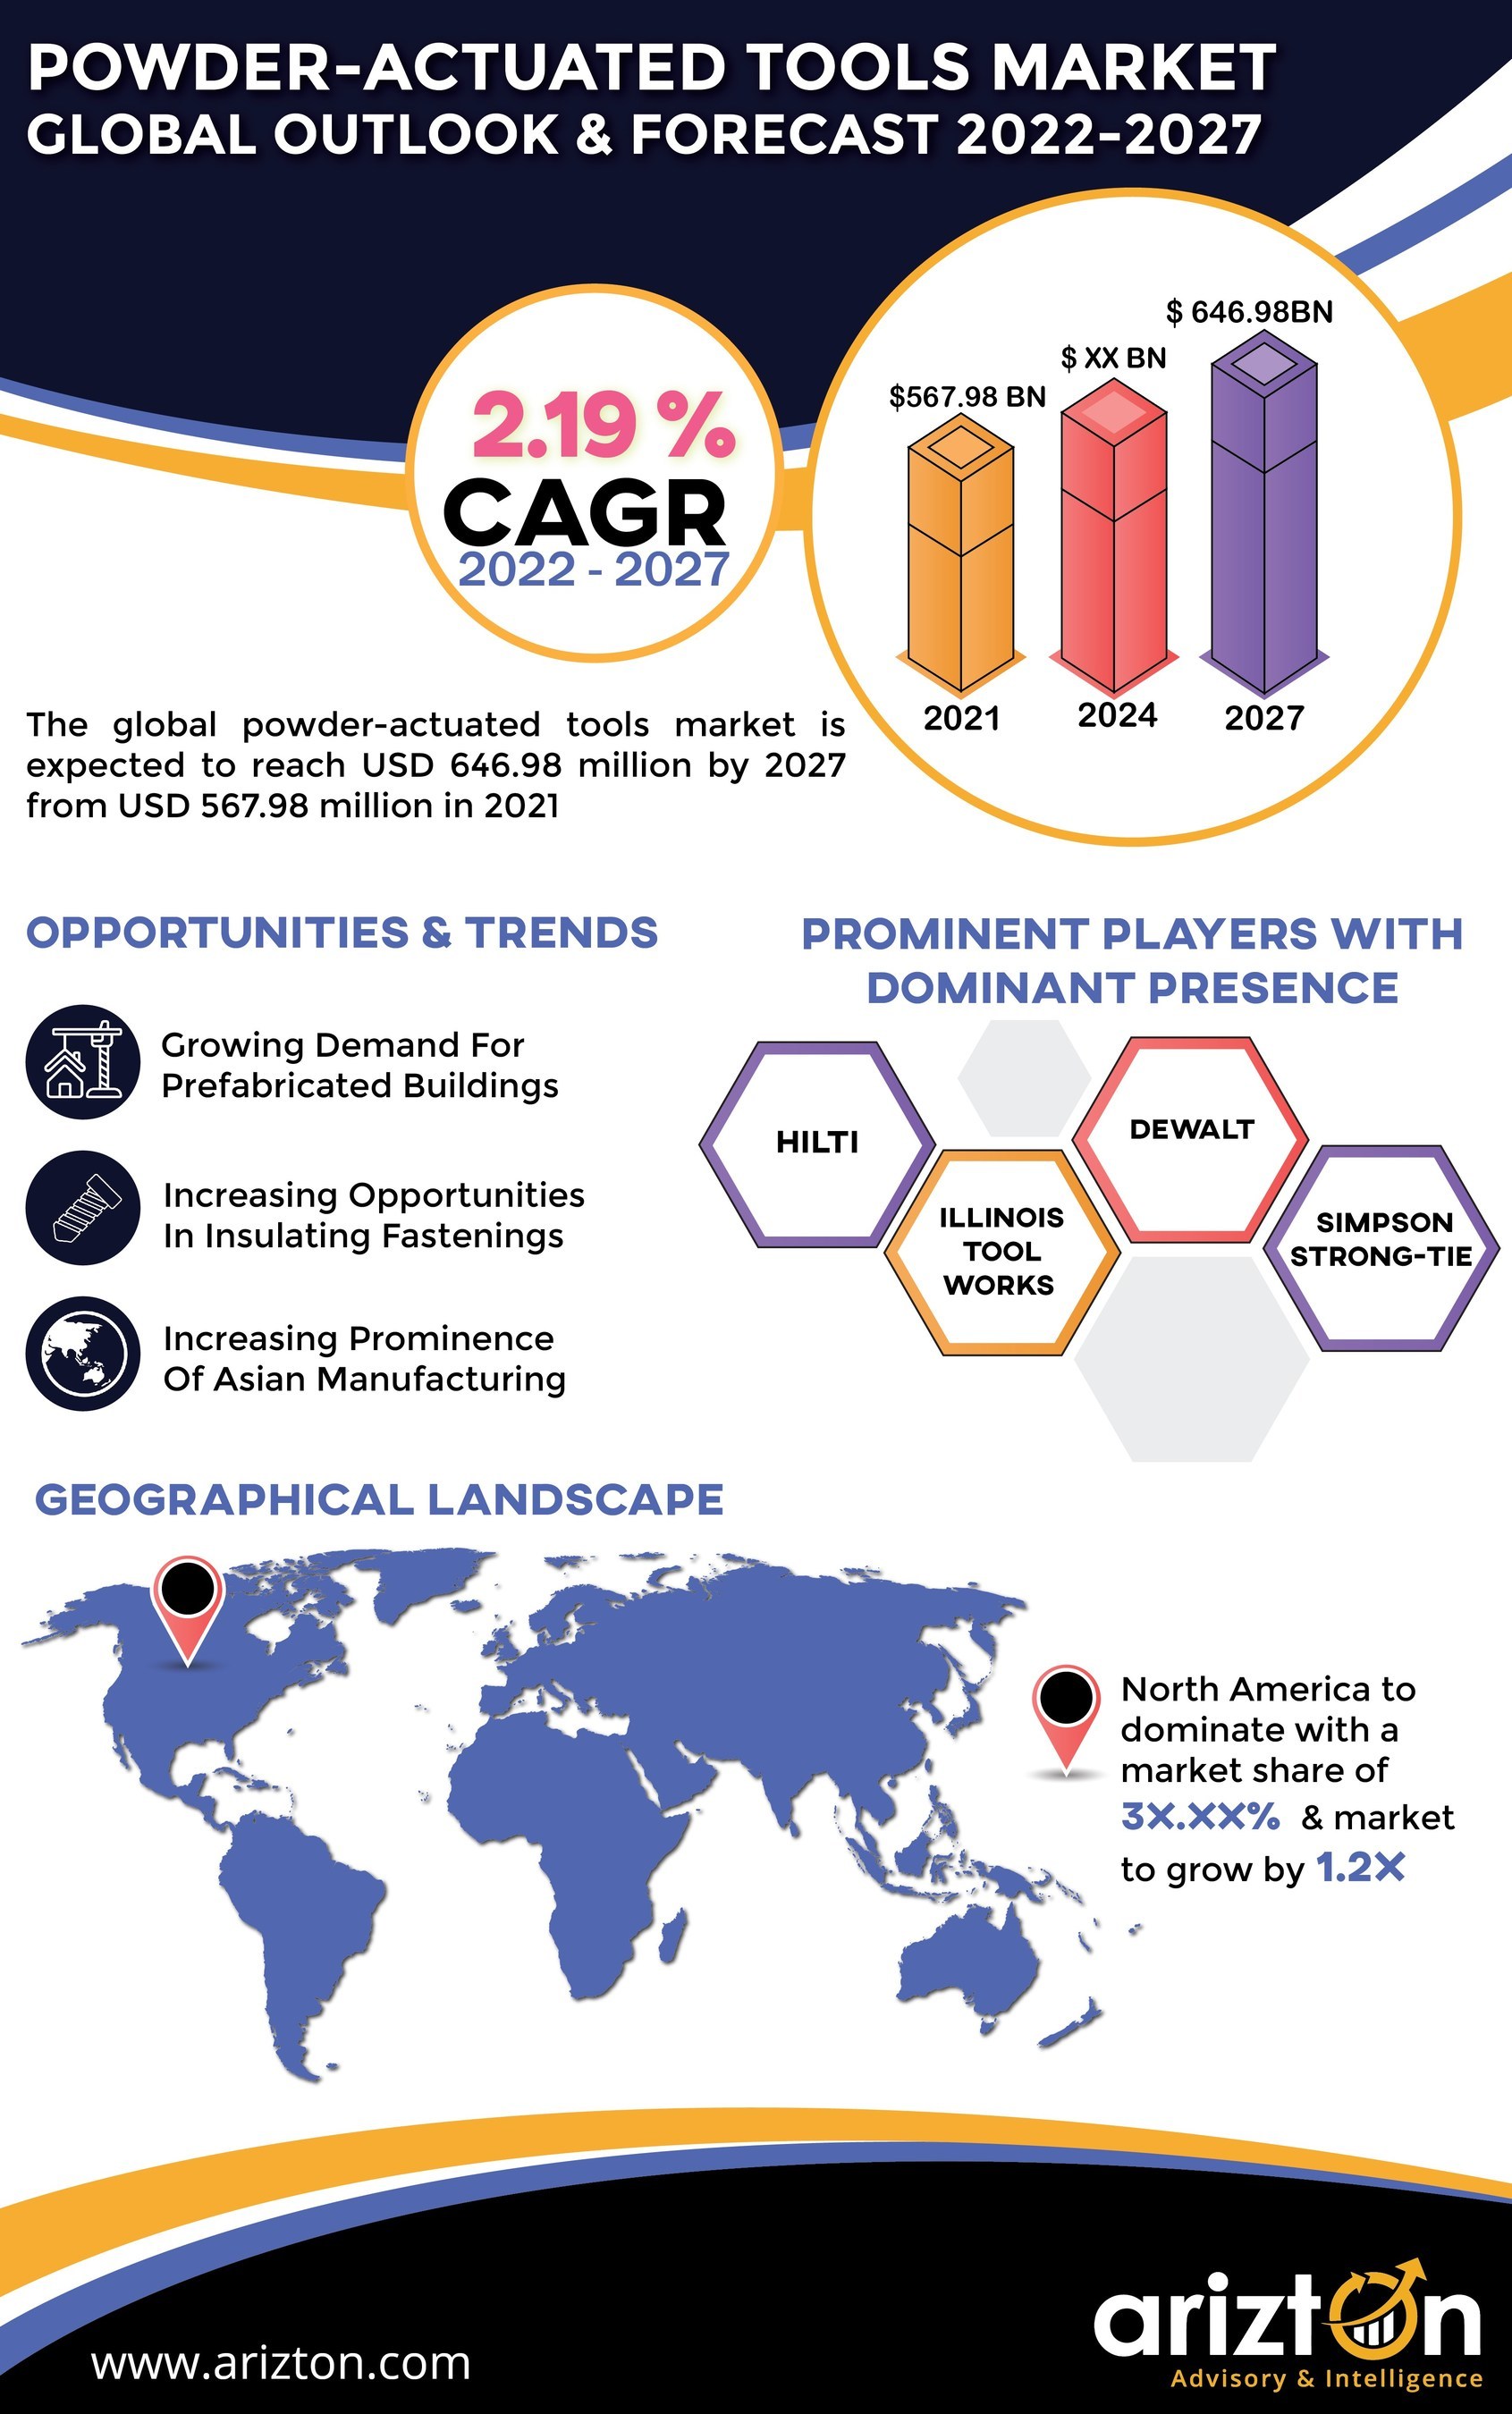 Powder-Actuated Tools Market to Record USD 646.98 Million by 2027. Advanced Product Launches Like Automatic Tools will Keep Vendors Ahead in the Competition - Arizton